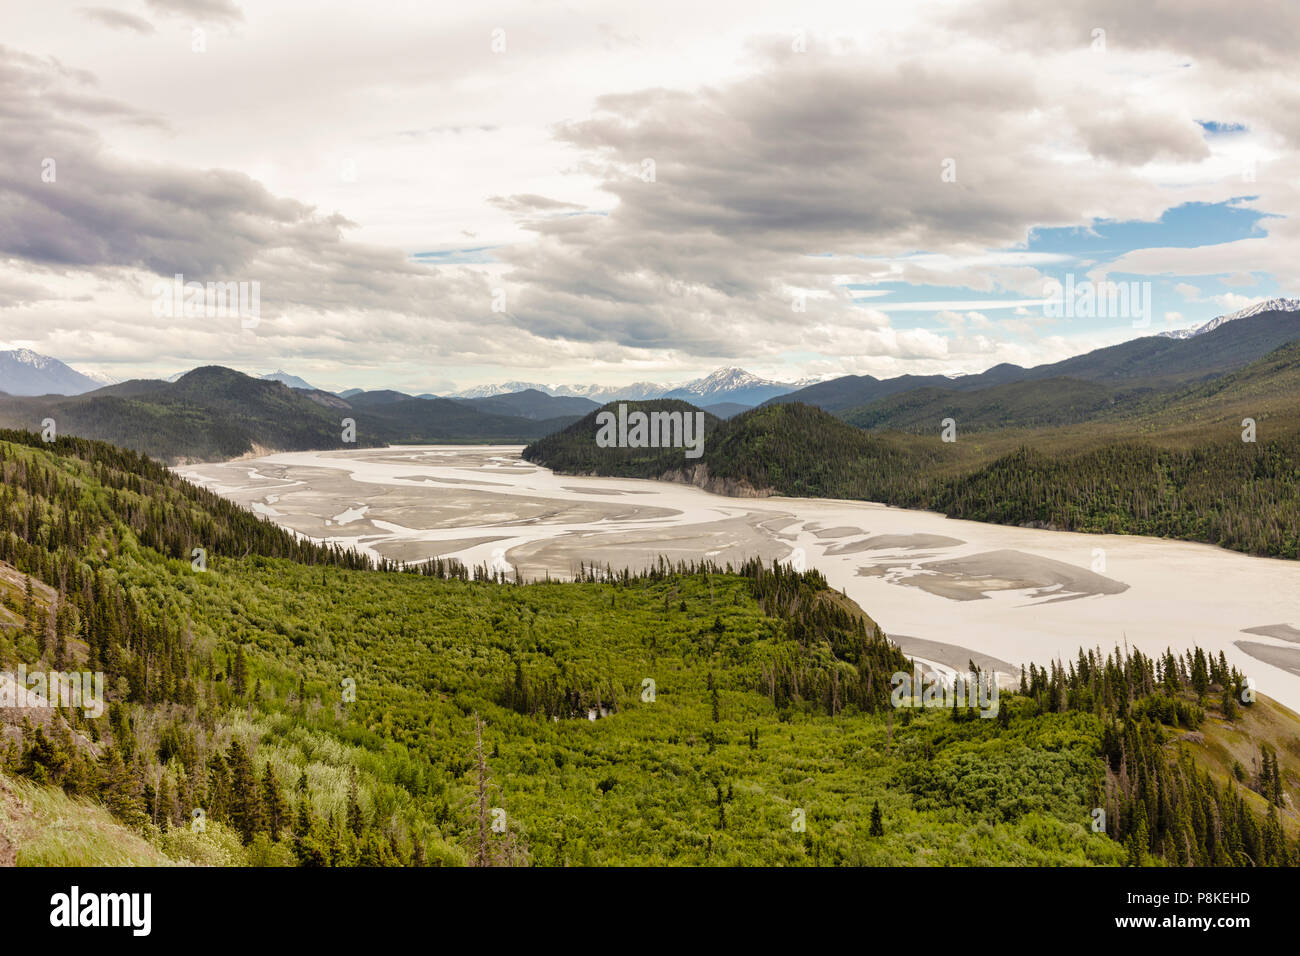 Il rame River Valley in Wrangell-St. Elias National Park in Alaska centromeridionale. Foto Stock